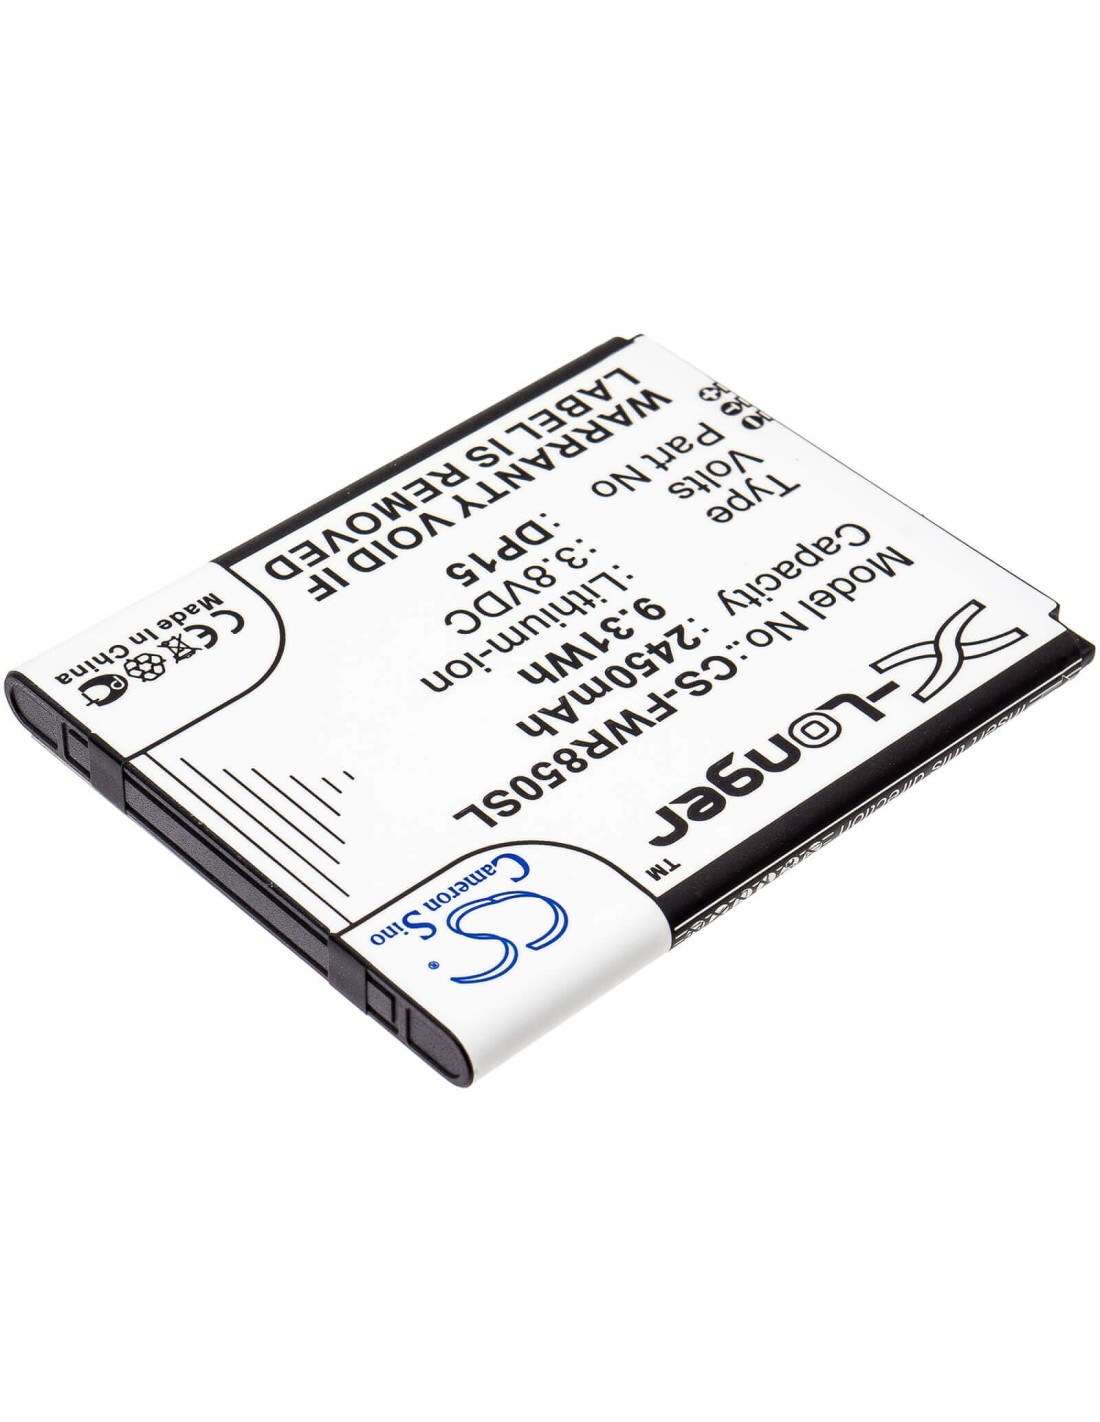 Battery for Franklin Wireless, R850 3.8V, 2450mAh - 9.31Wh